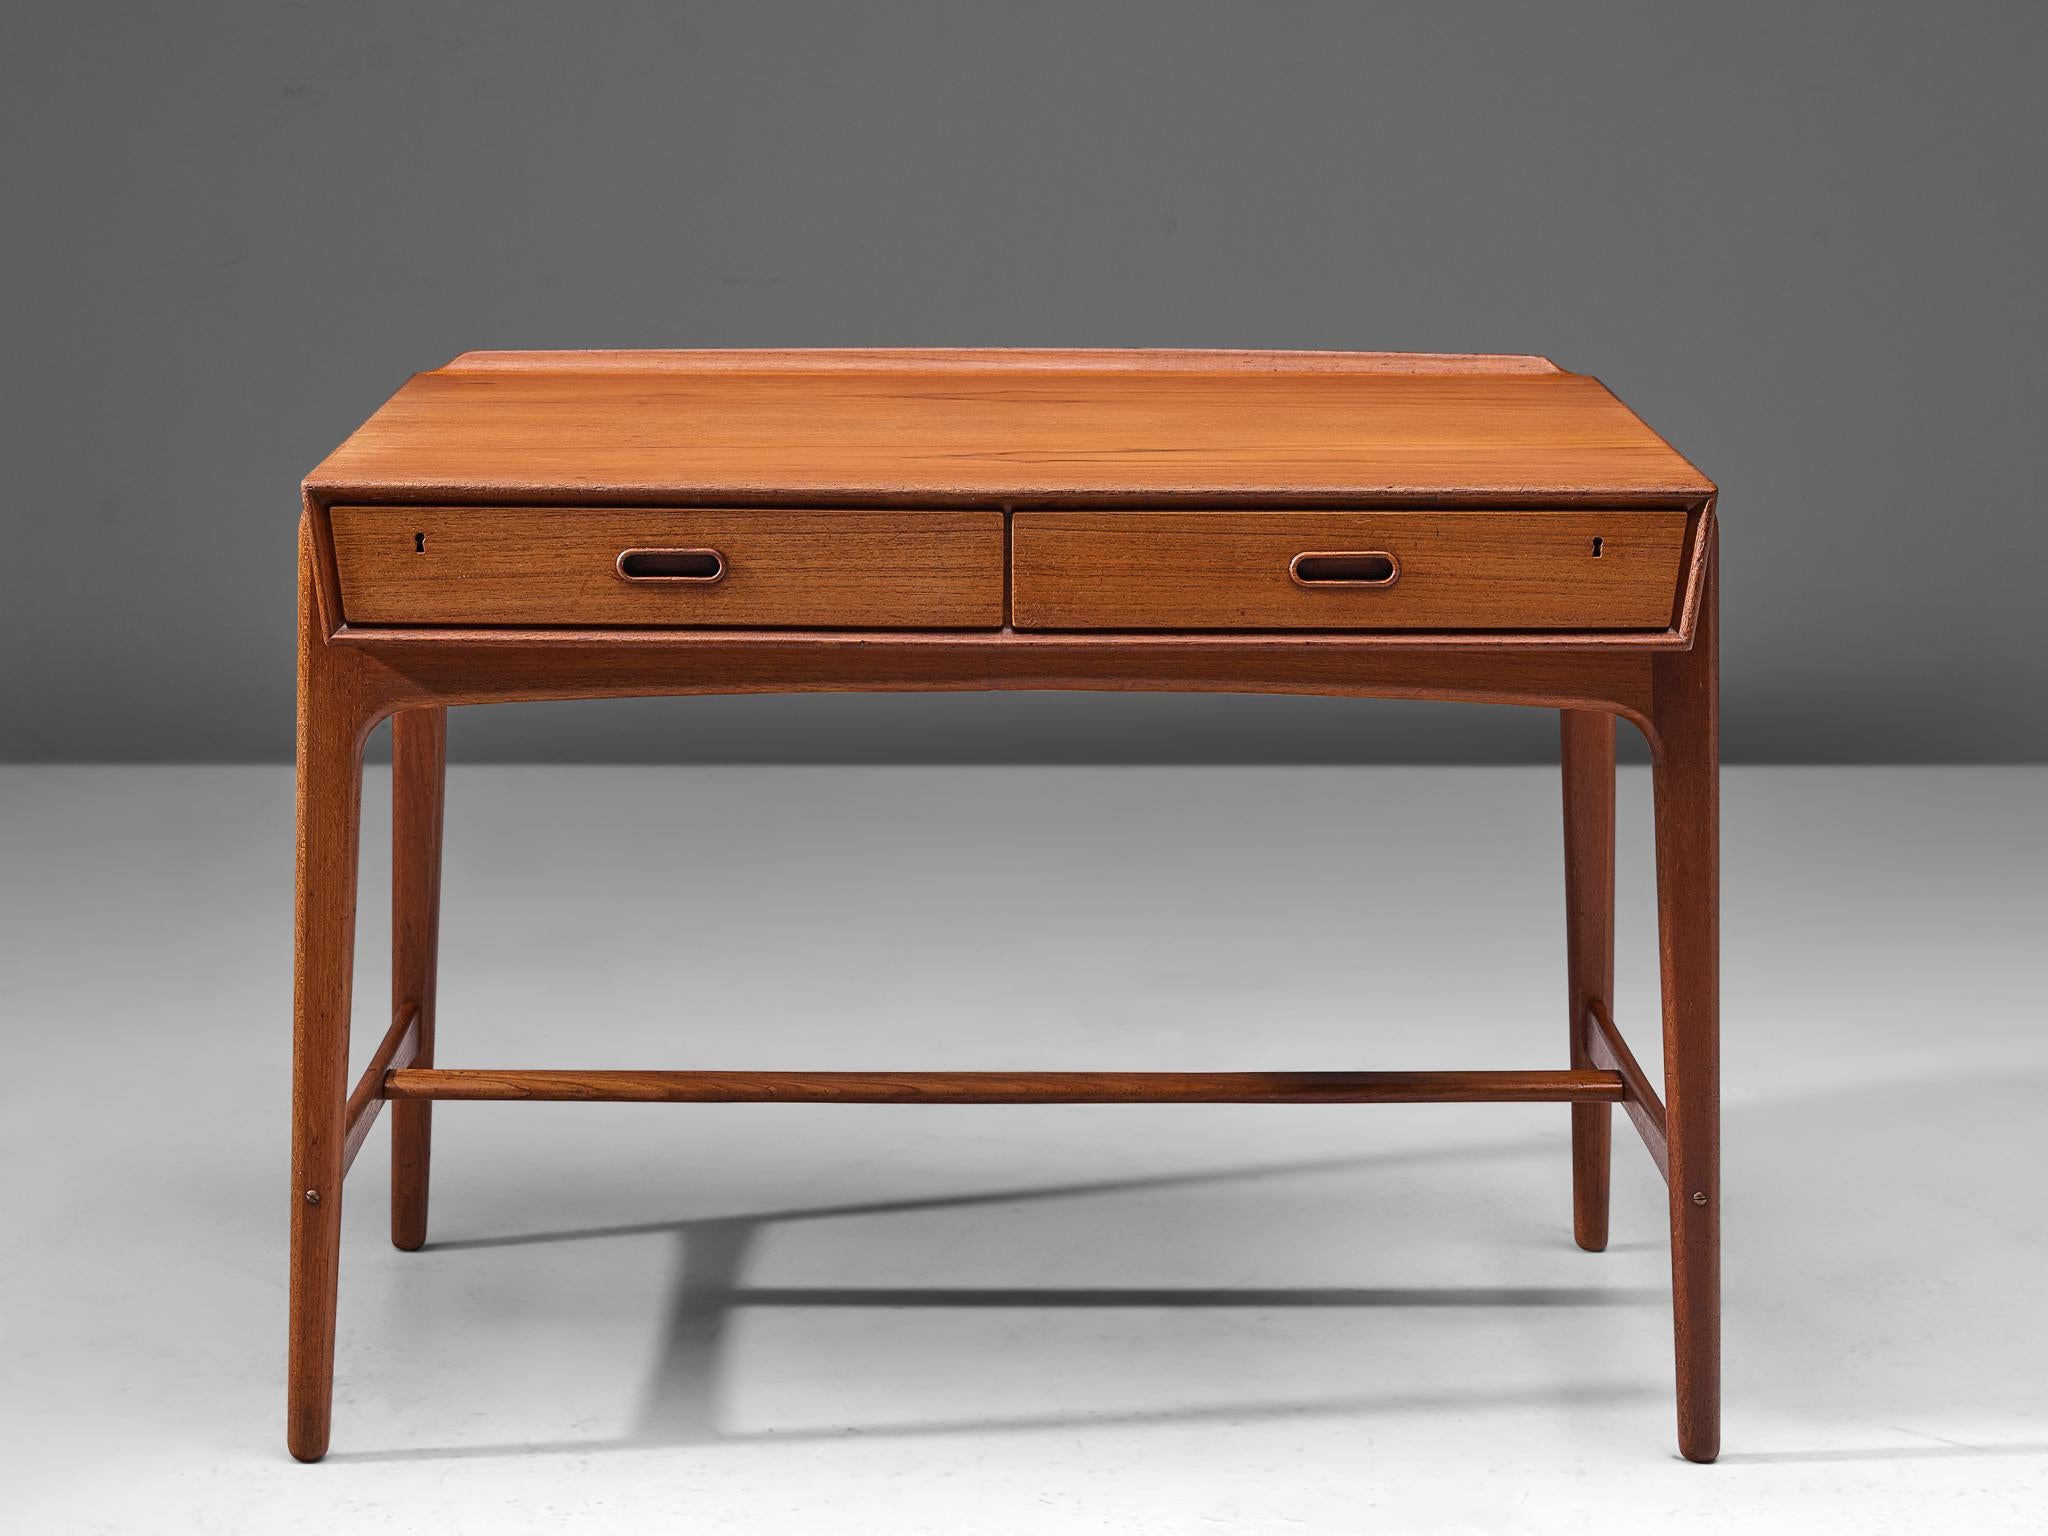 Svend Aage Madsen for Sigurd Hansens Møbelfabrik, writing desk in teak wood, Denmark, 1950s.

This writing desk is designed by Svend Aage Madsen in the 1950s. The top seems to lay into the frame. Please note the slightly angled legs, with lovely